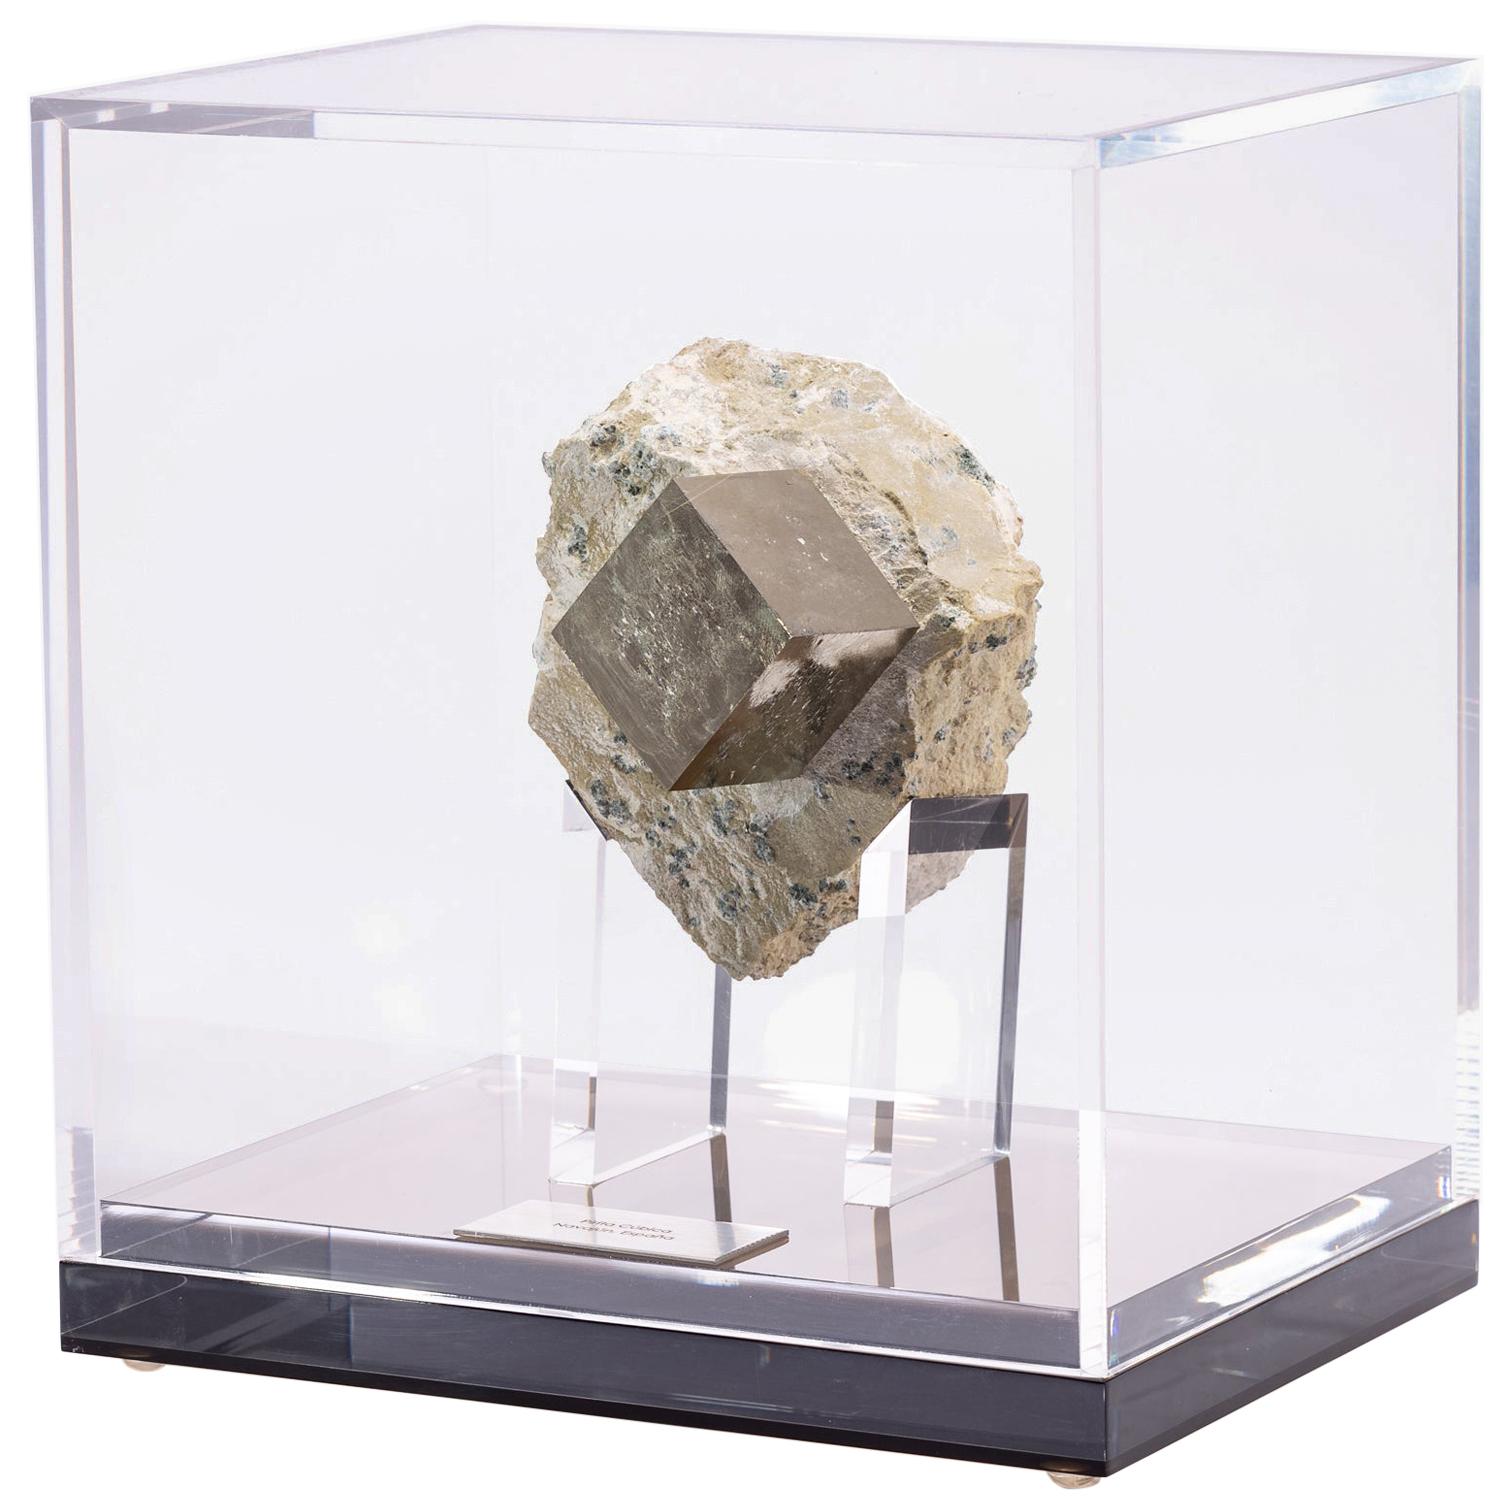 Natural Pyrite Cube from Spain in Acrylic Box